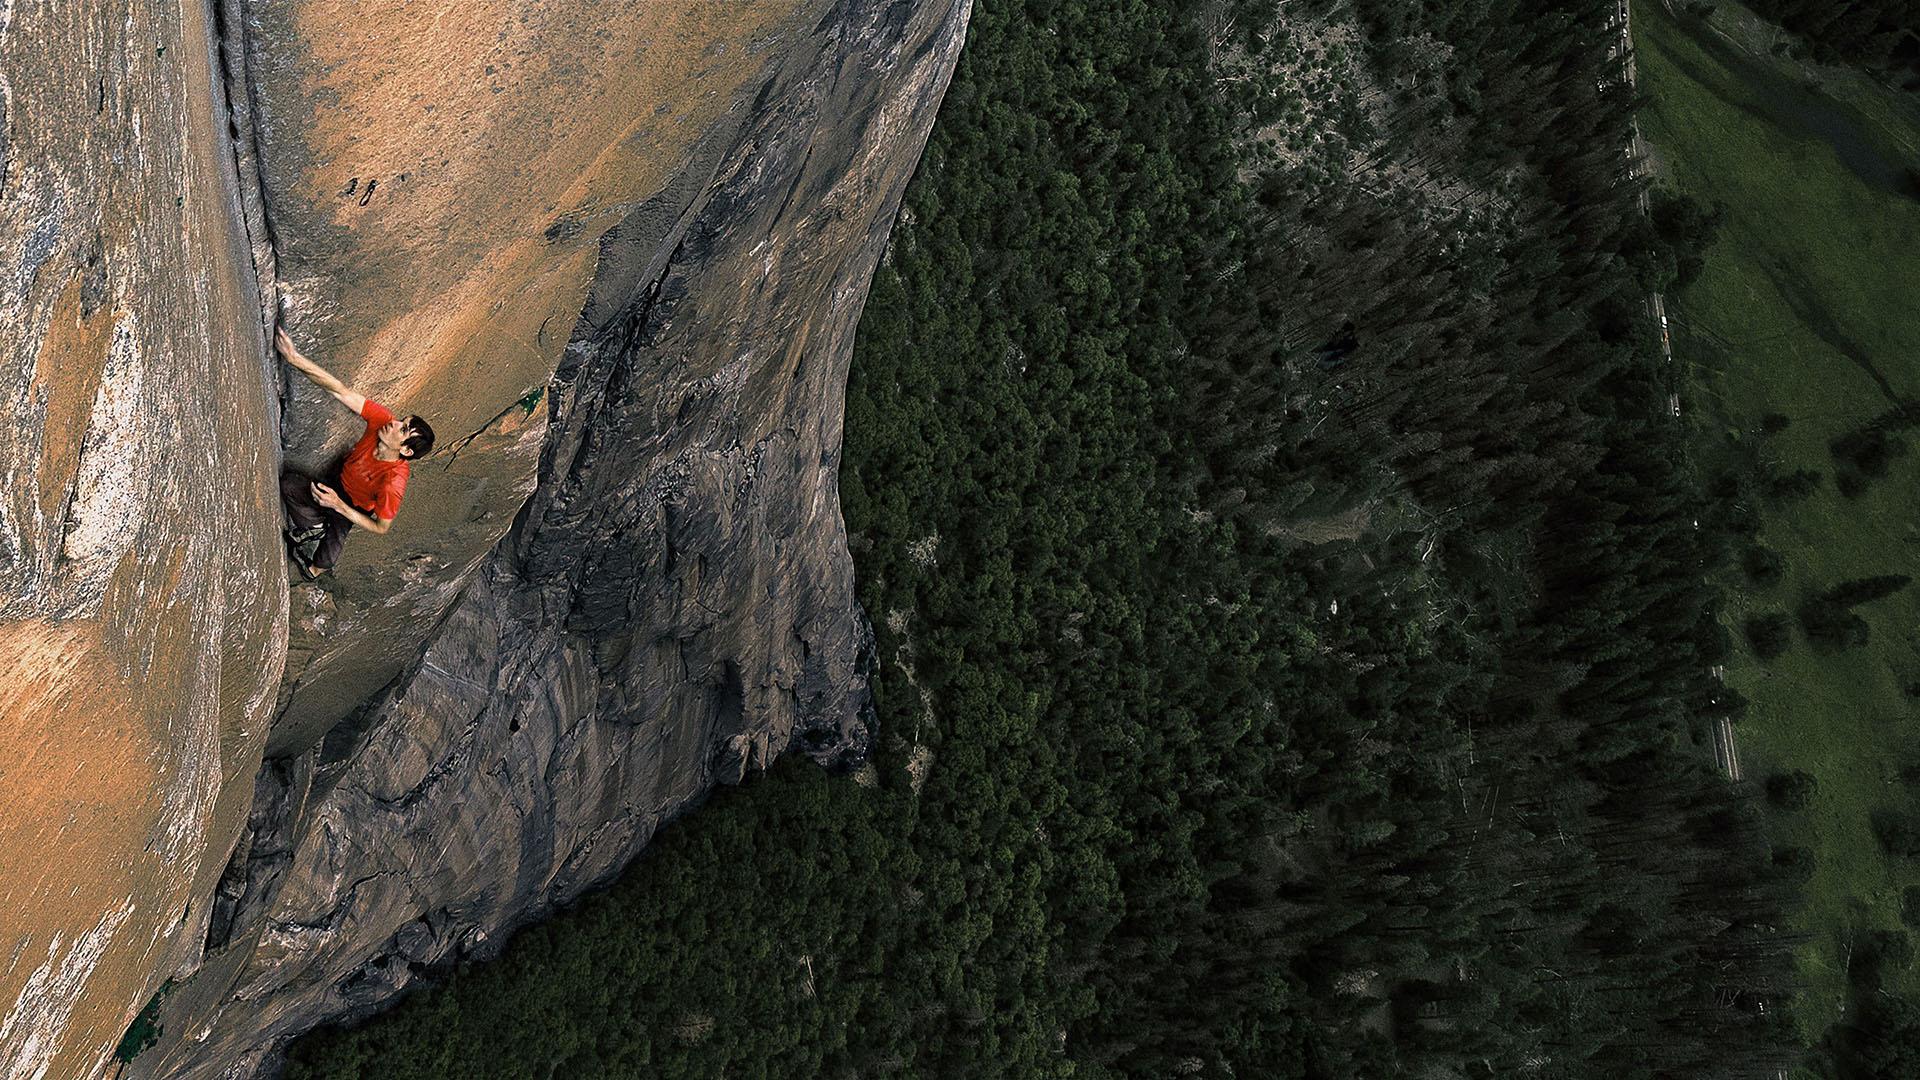 Review: Free Solo